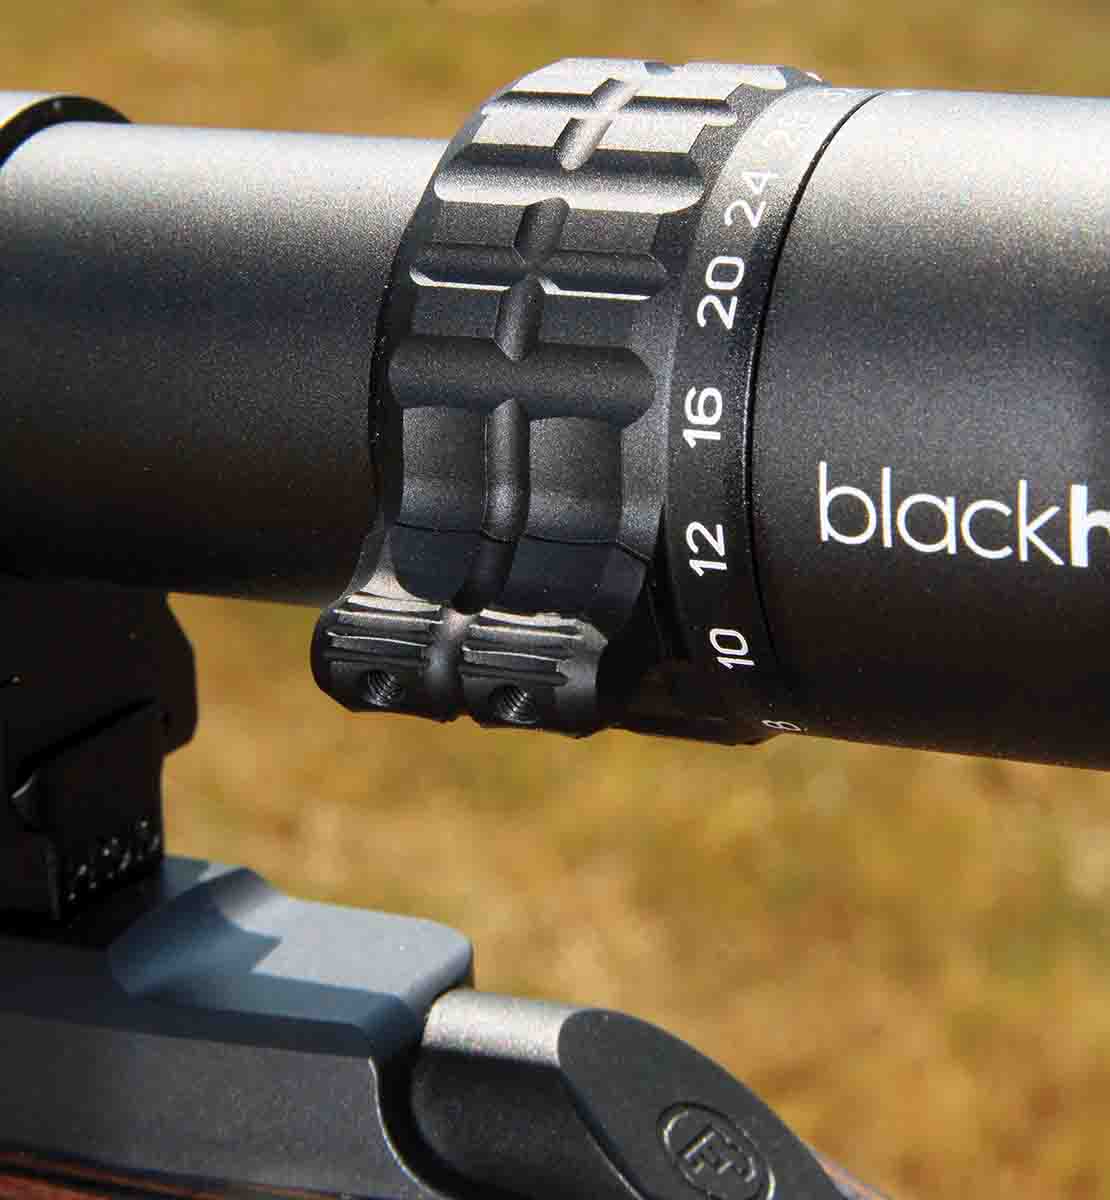 The magnification ring included a raised throw lever that offers excellent purchase in any conditions.